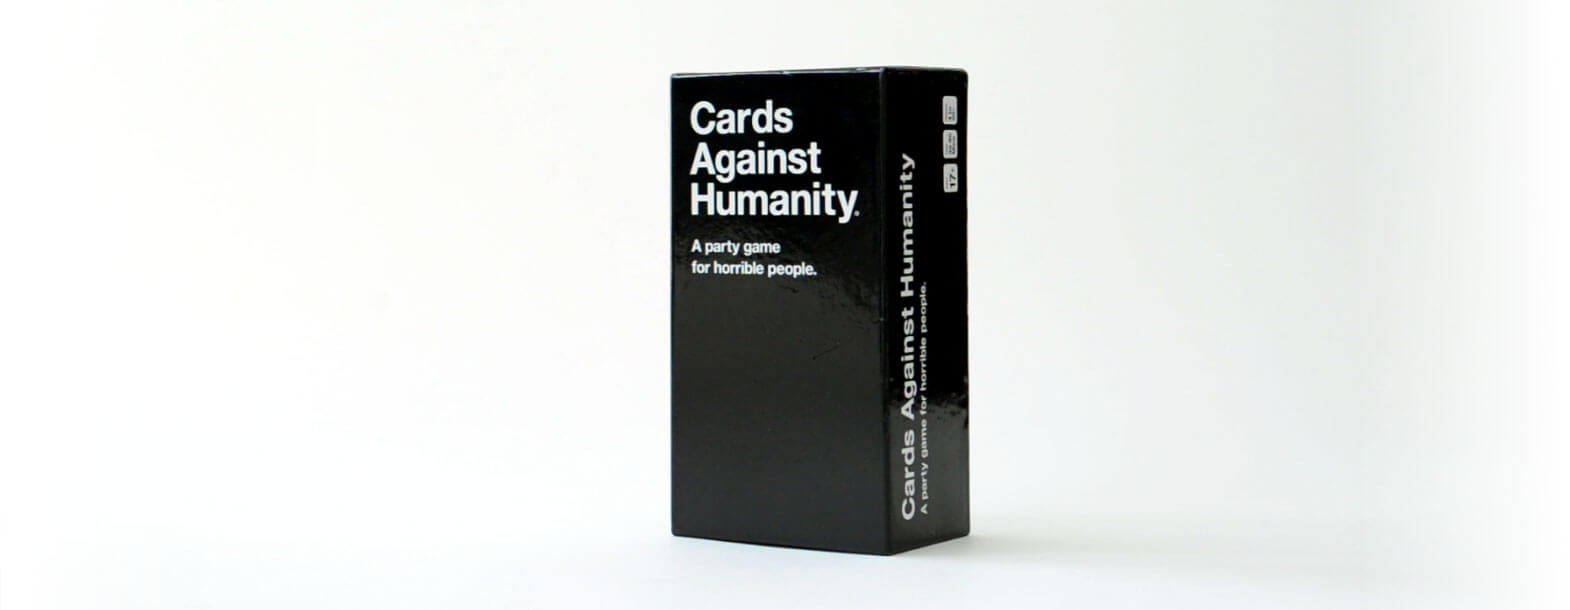 Cards Against Humanity With Regard To Cards Against Humanity Template